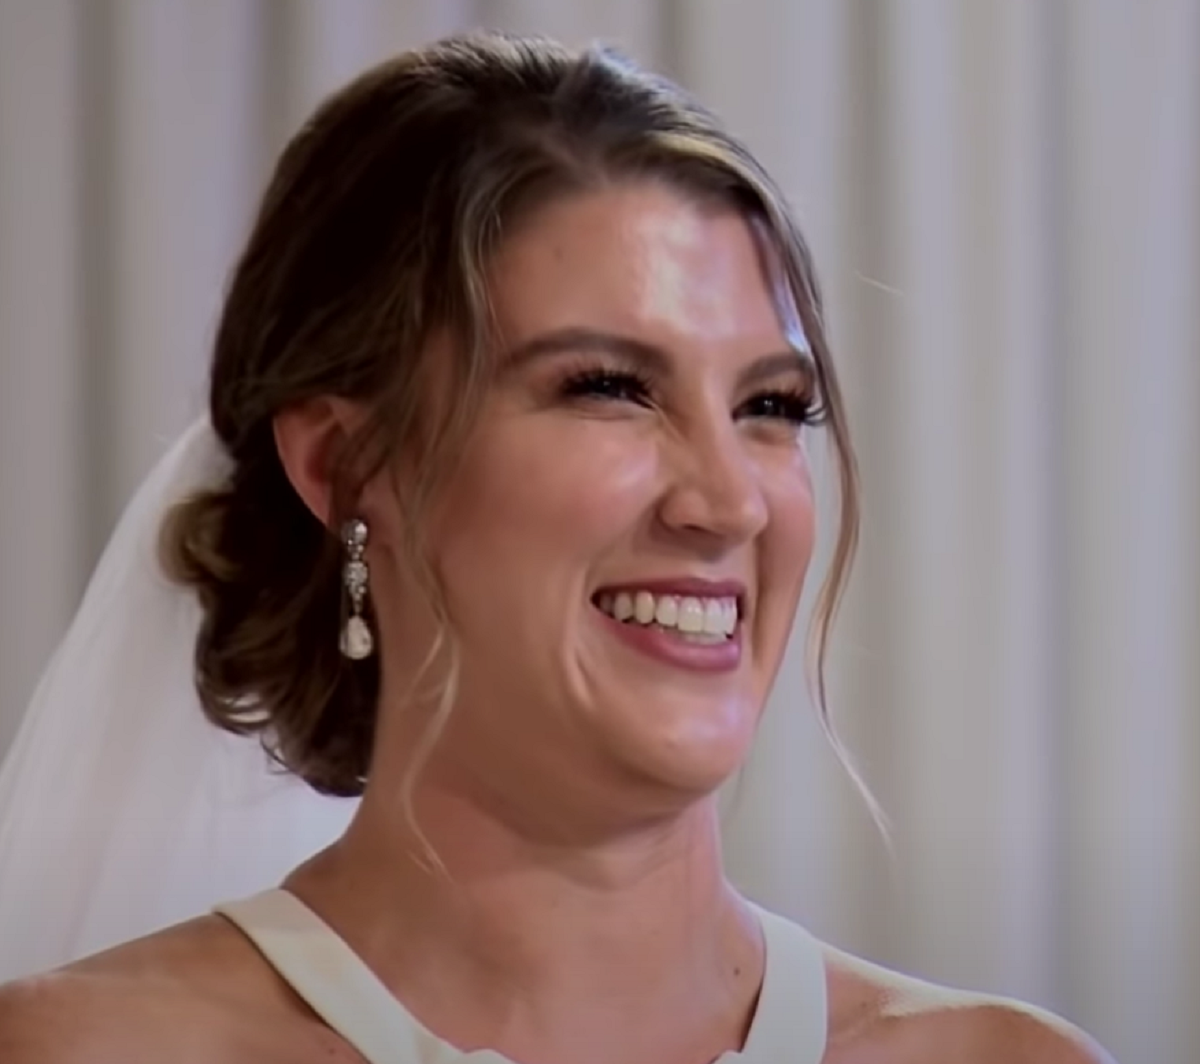 ‘Married at First Sight’ EXCLUSIVE SNEAK PEEK: Jacob Admits He ‘Doesn’t Have Love for Haley’